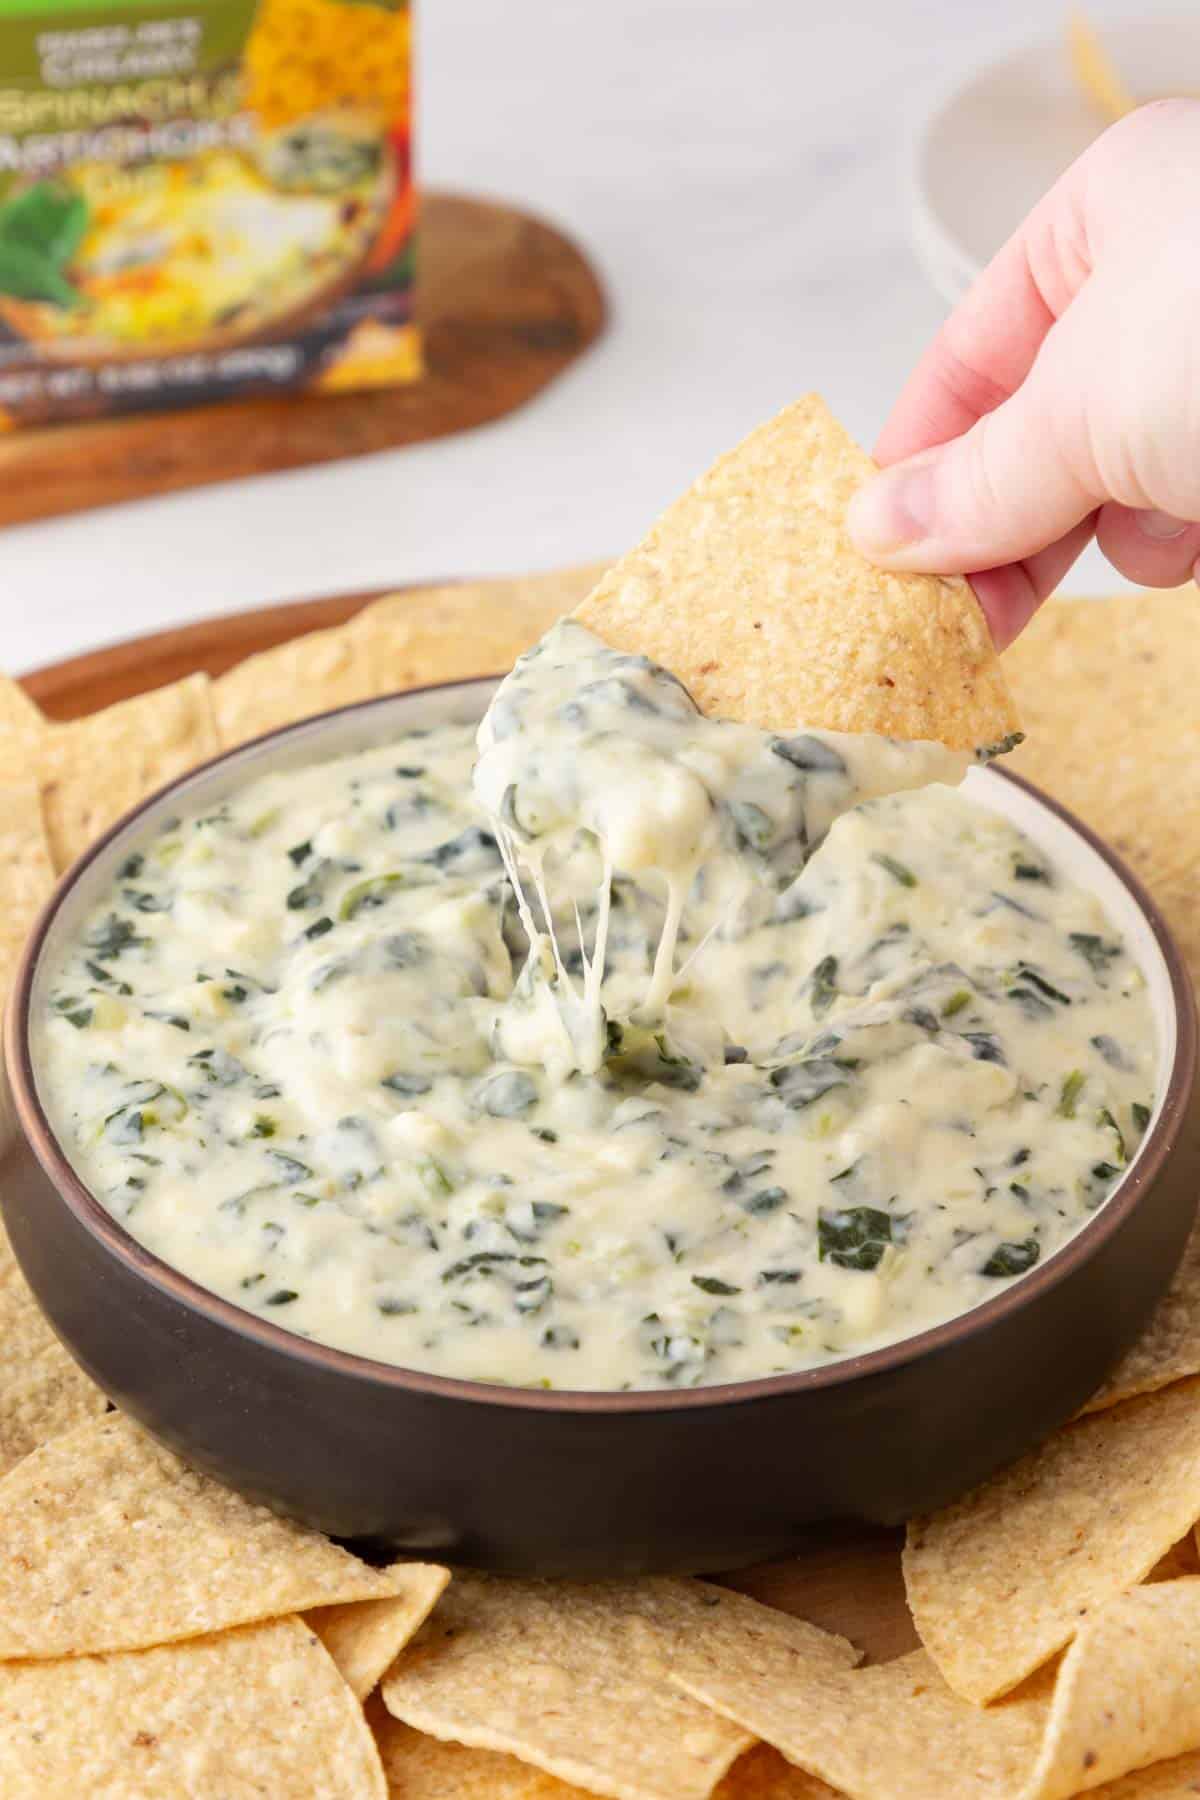 Trader Joe's Spinach and Artichoke Dip in a bowl with a chip dipped in the hot dip.